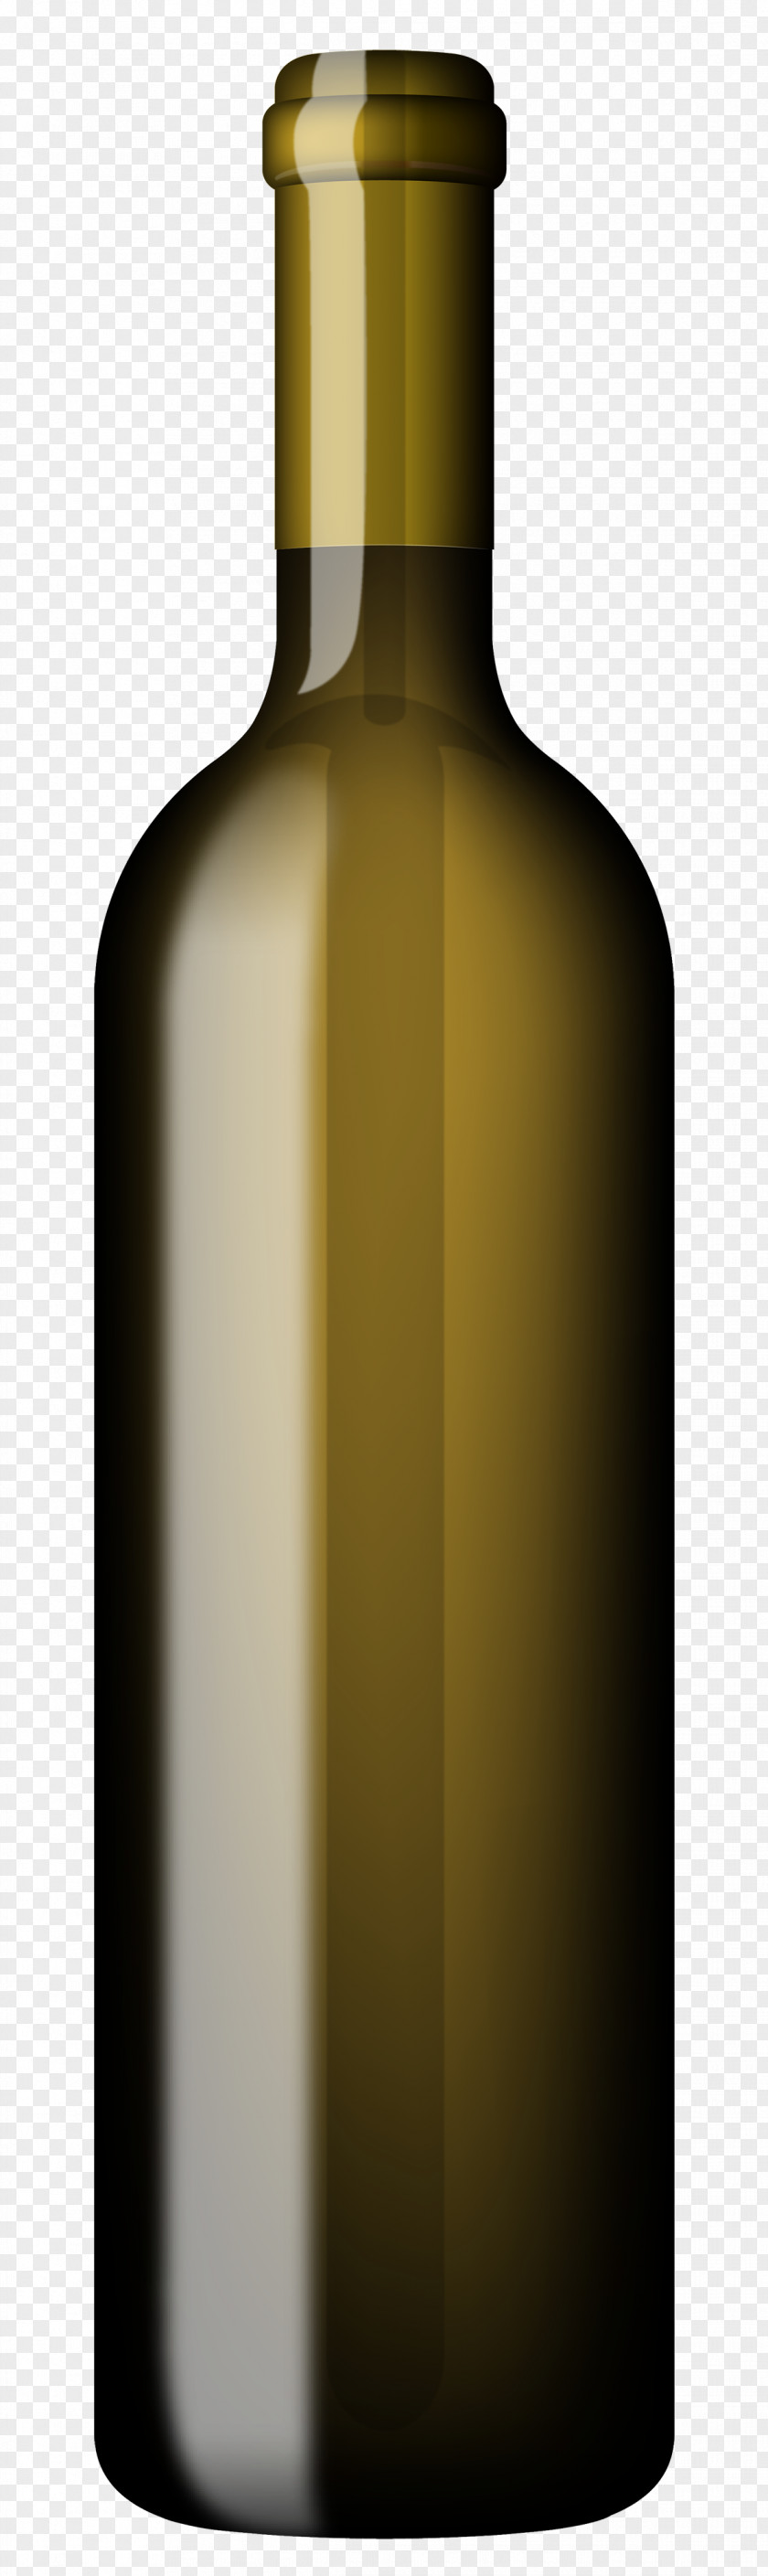 Alcohol Red Wine Bottle Grape PNG